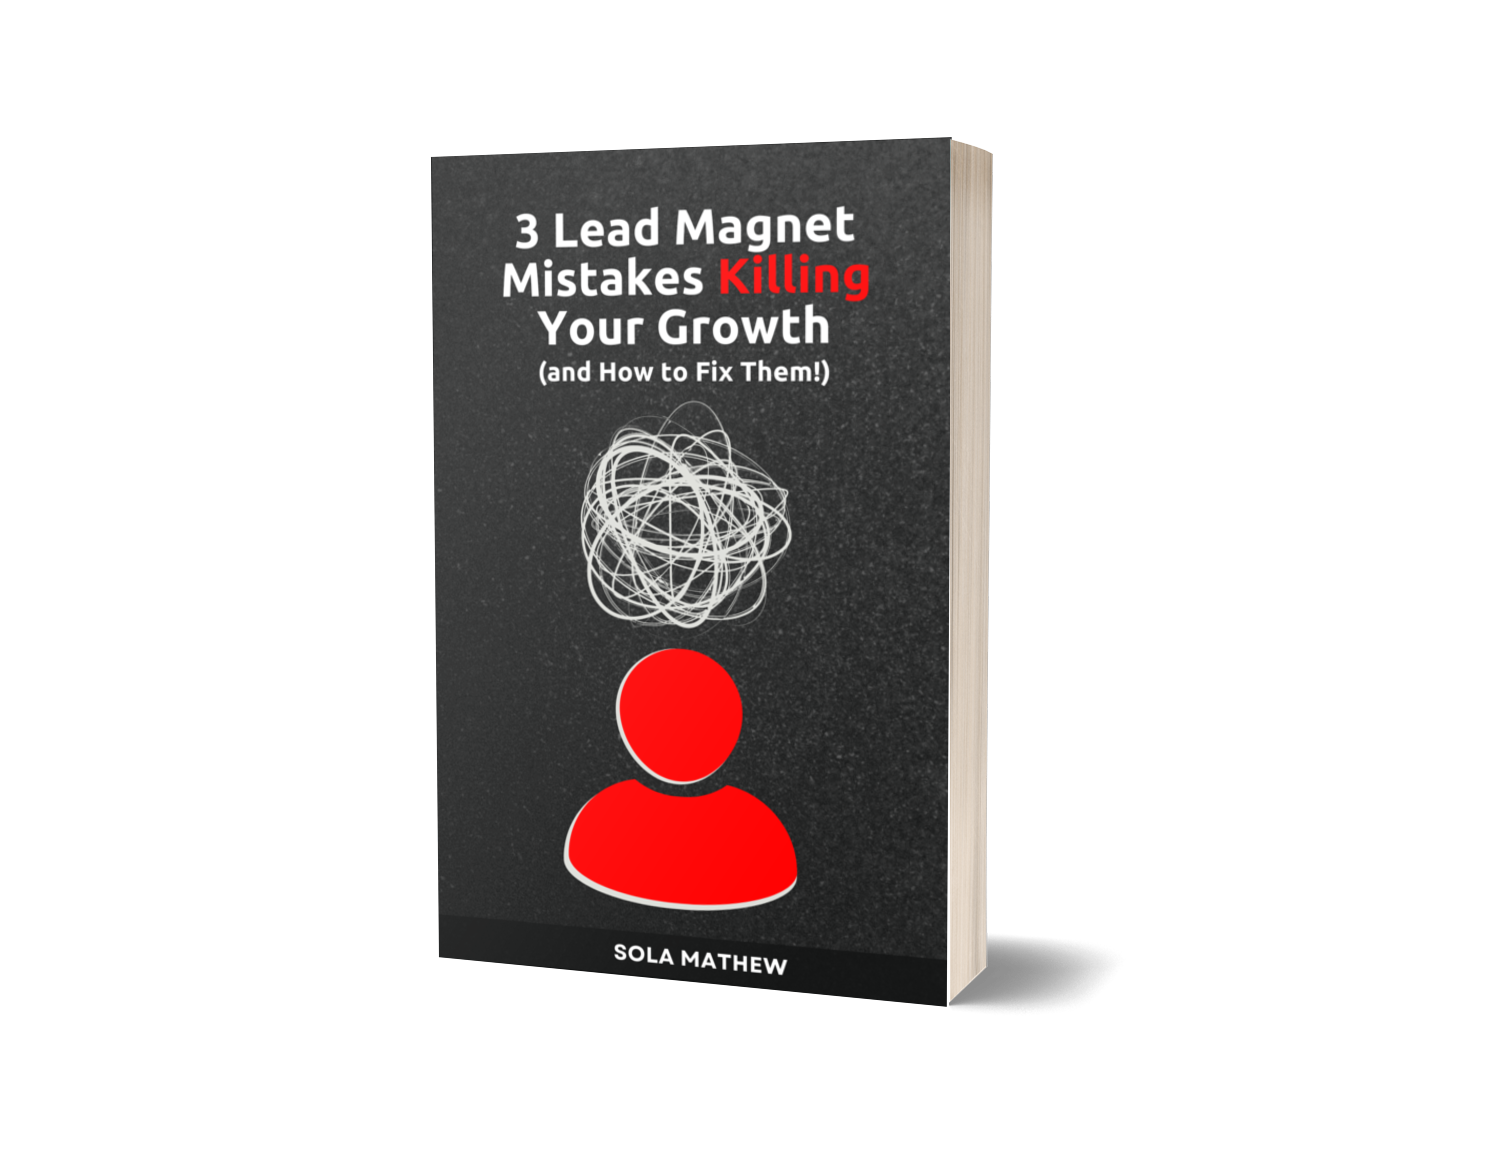 3 Lead Magnet Mistakes Killing Your Growth